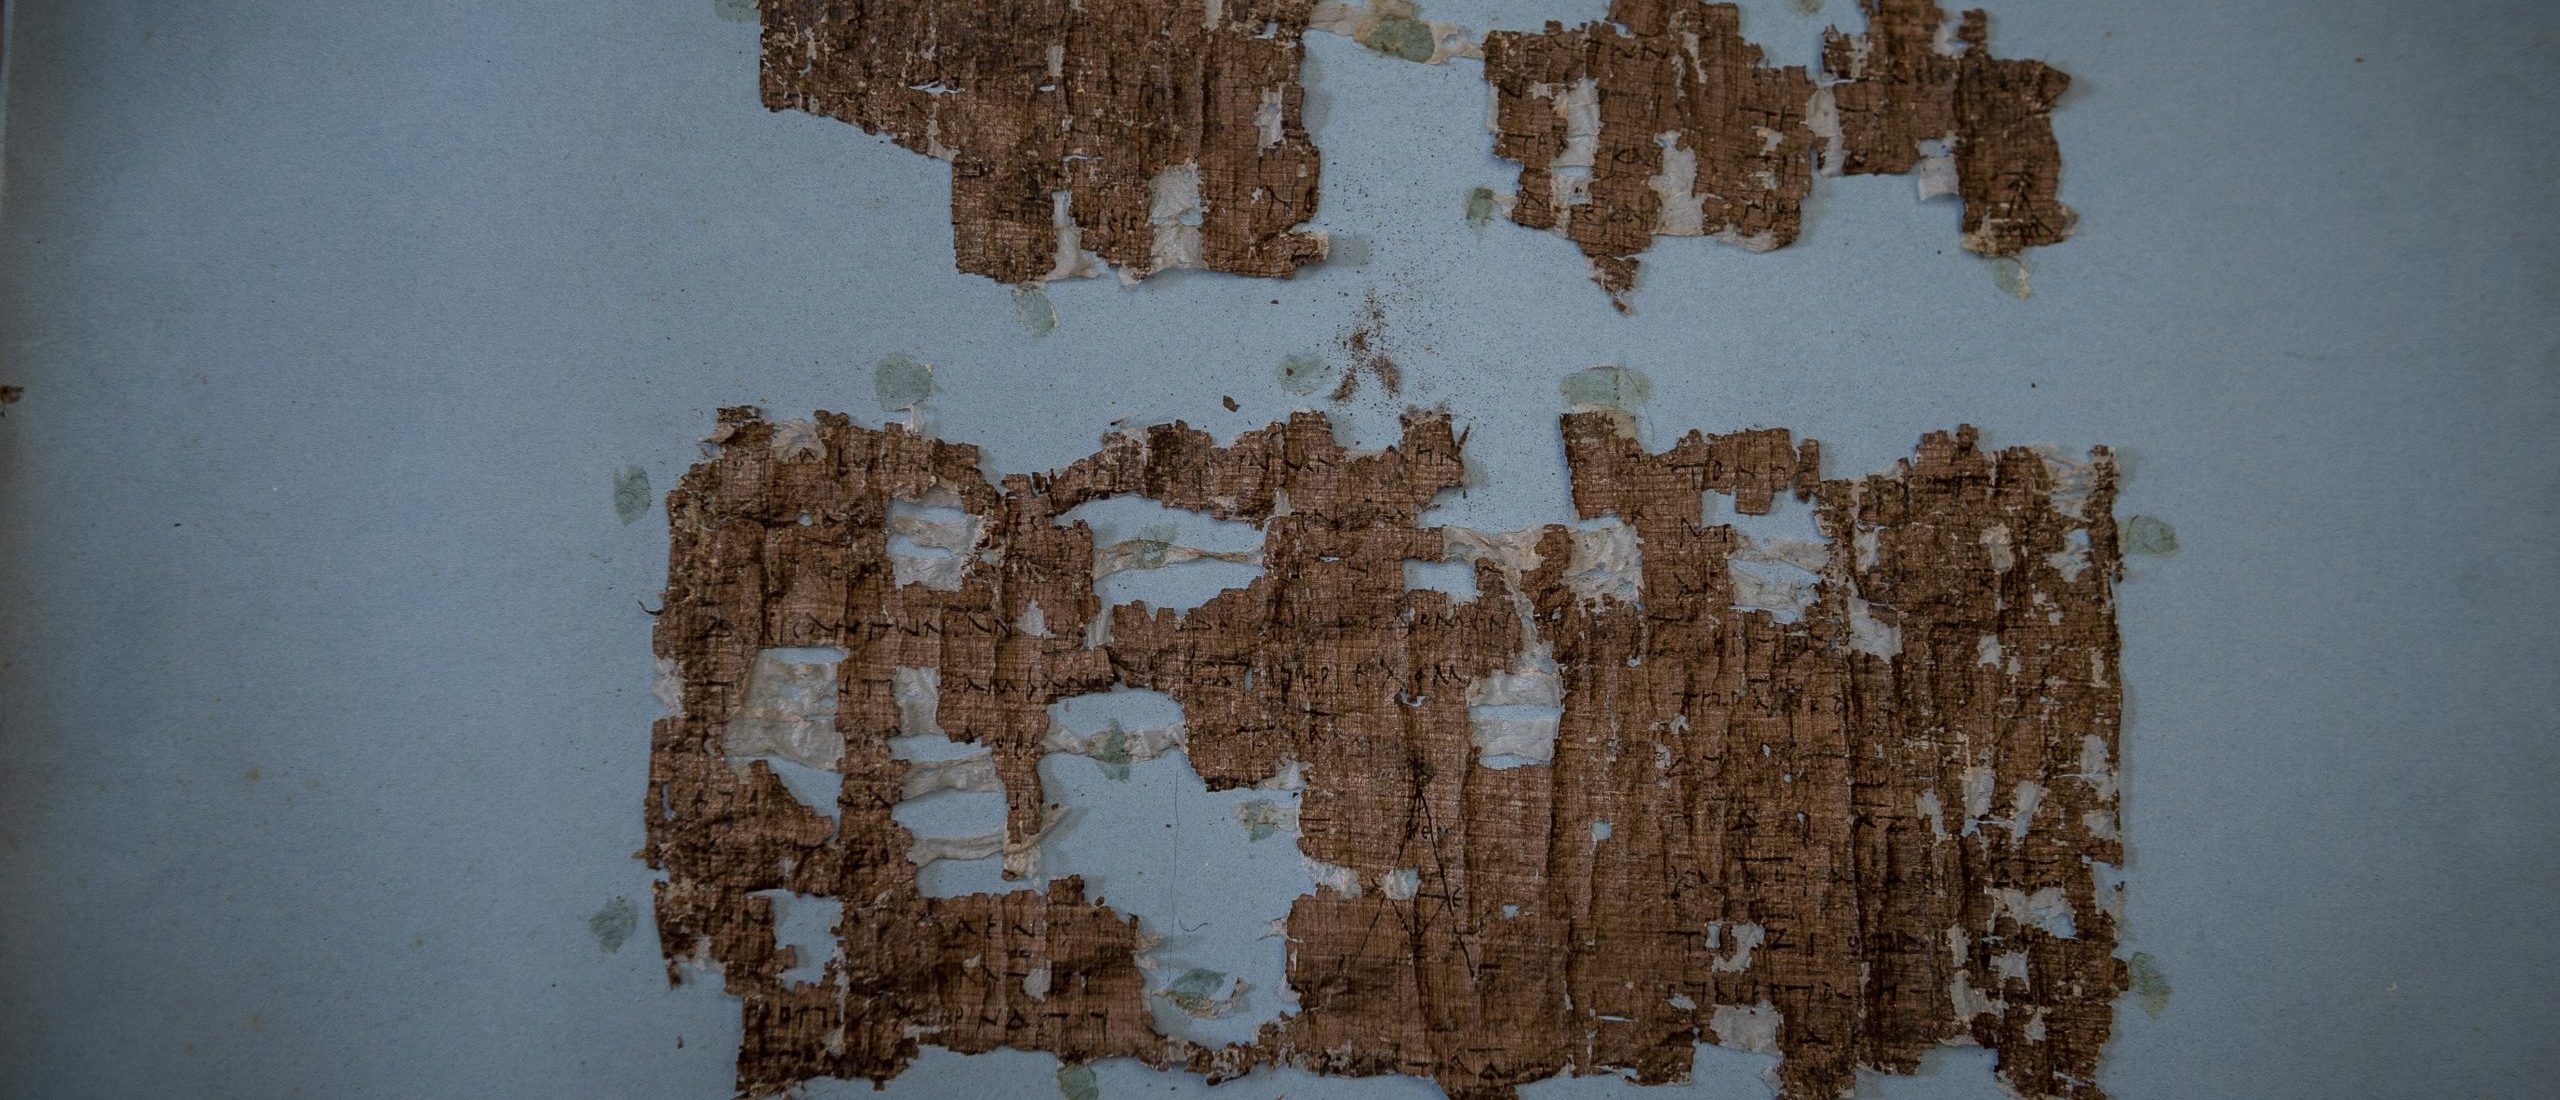 Scientists Reveal Newly Legible Pompeii Scrolls, Unread For Almost 2,000 Years. Is History About To Blow Up?